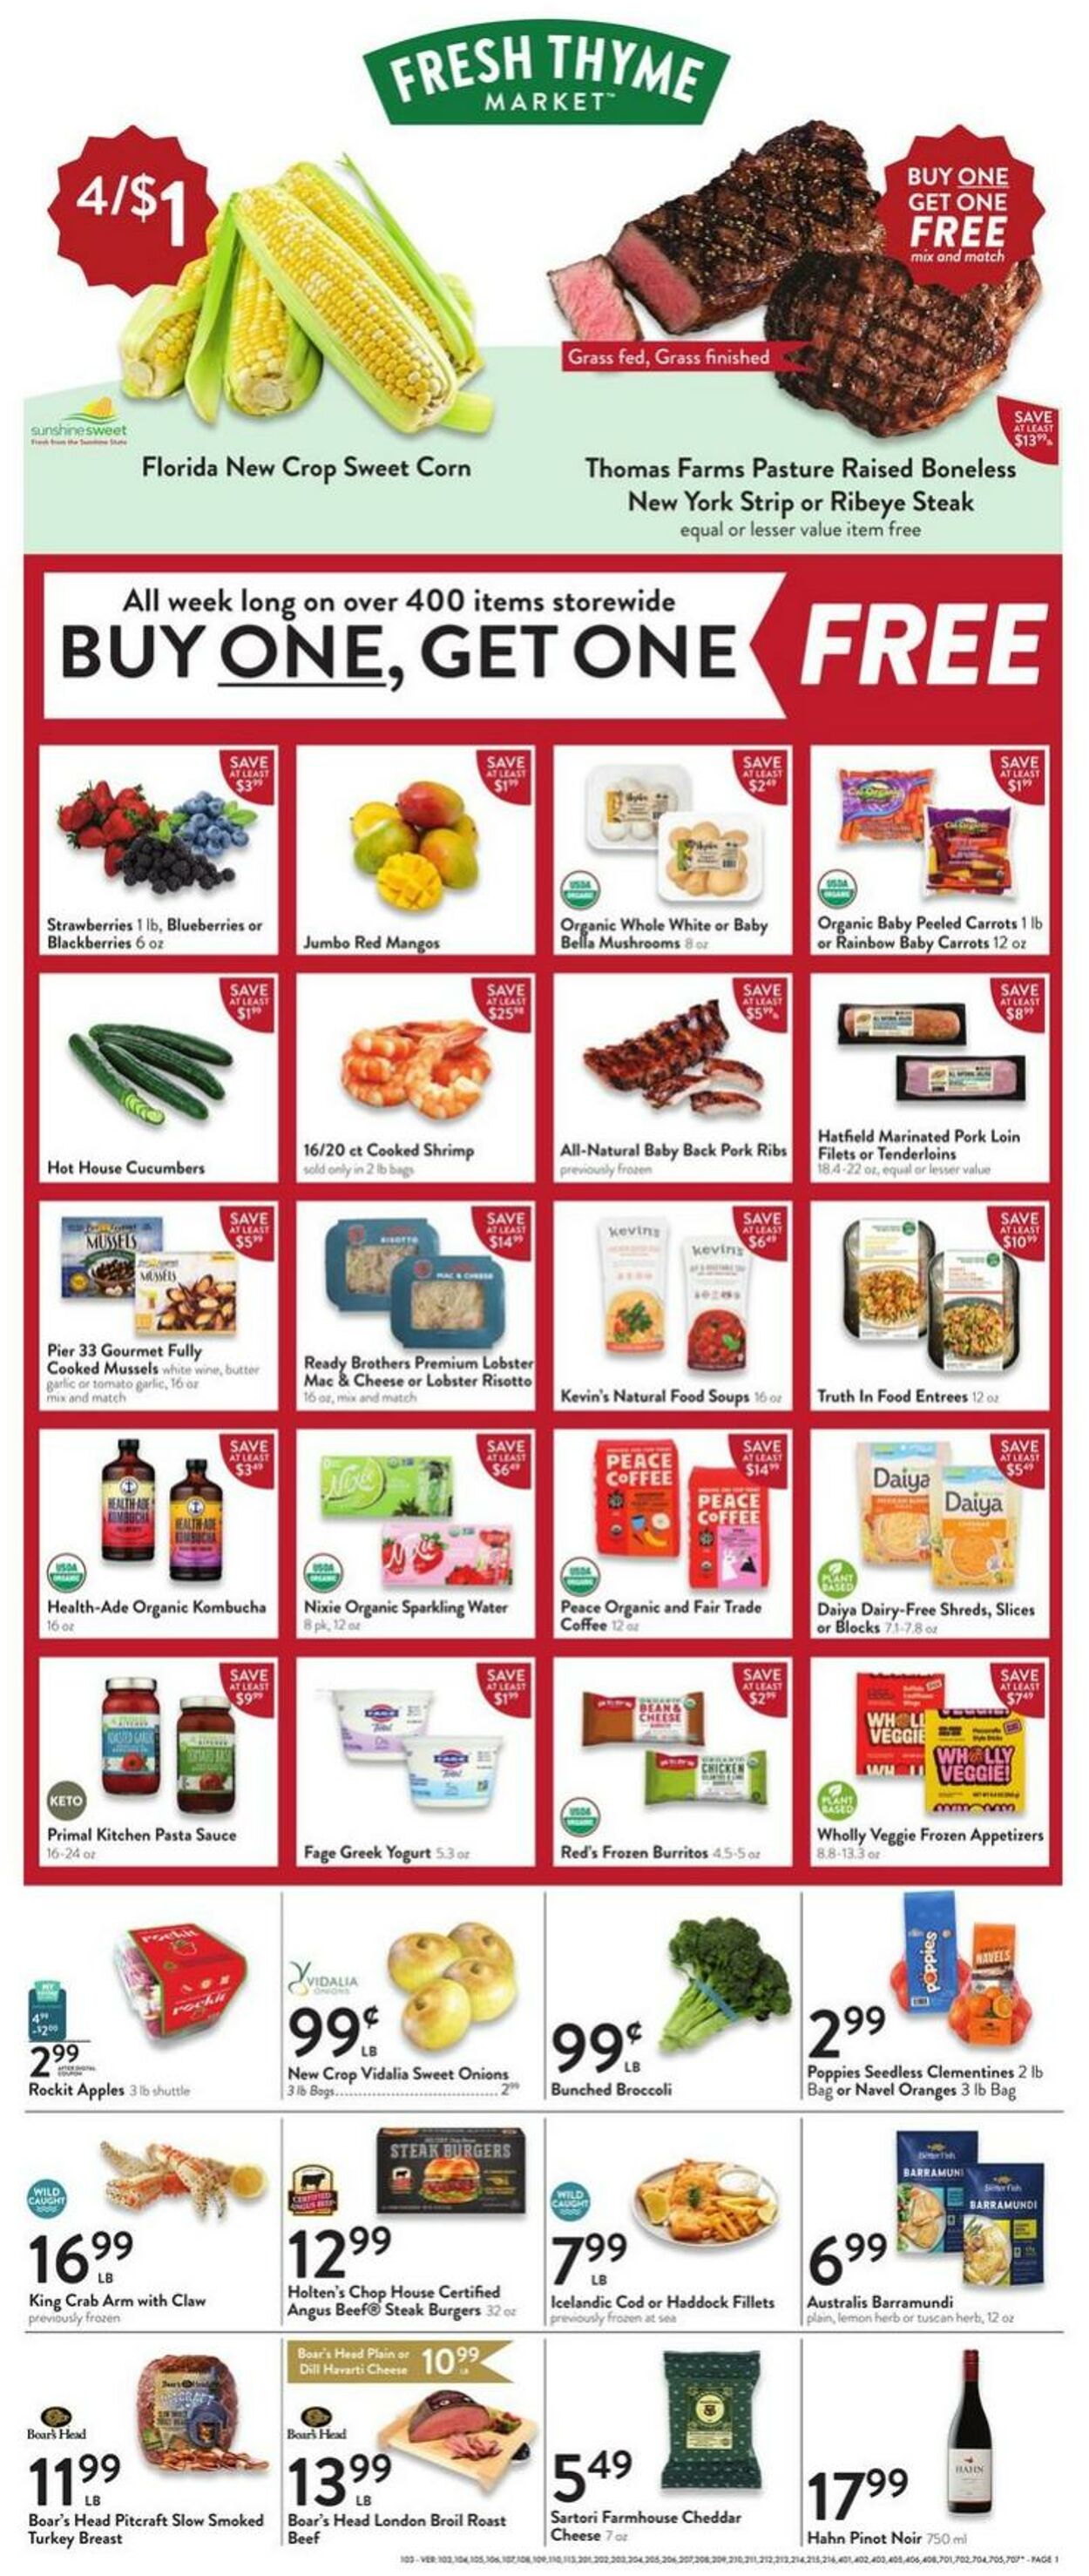 Fresh Thyme Promotional weekly ads